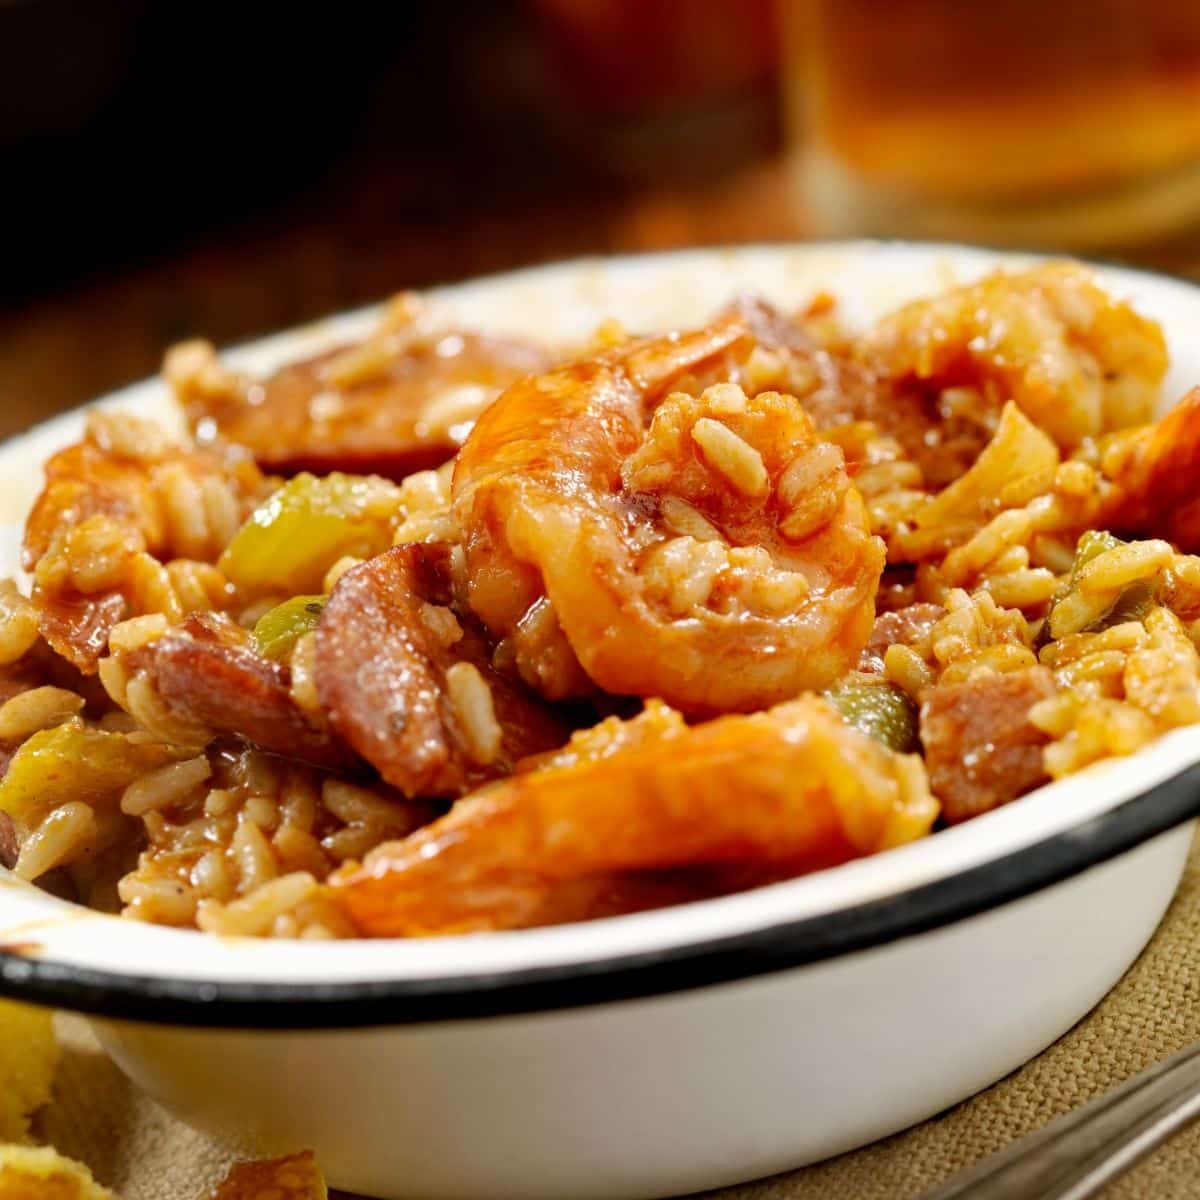 Shrimp jambalaya in a white bowl with a blue stripe on a wooden table